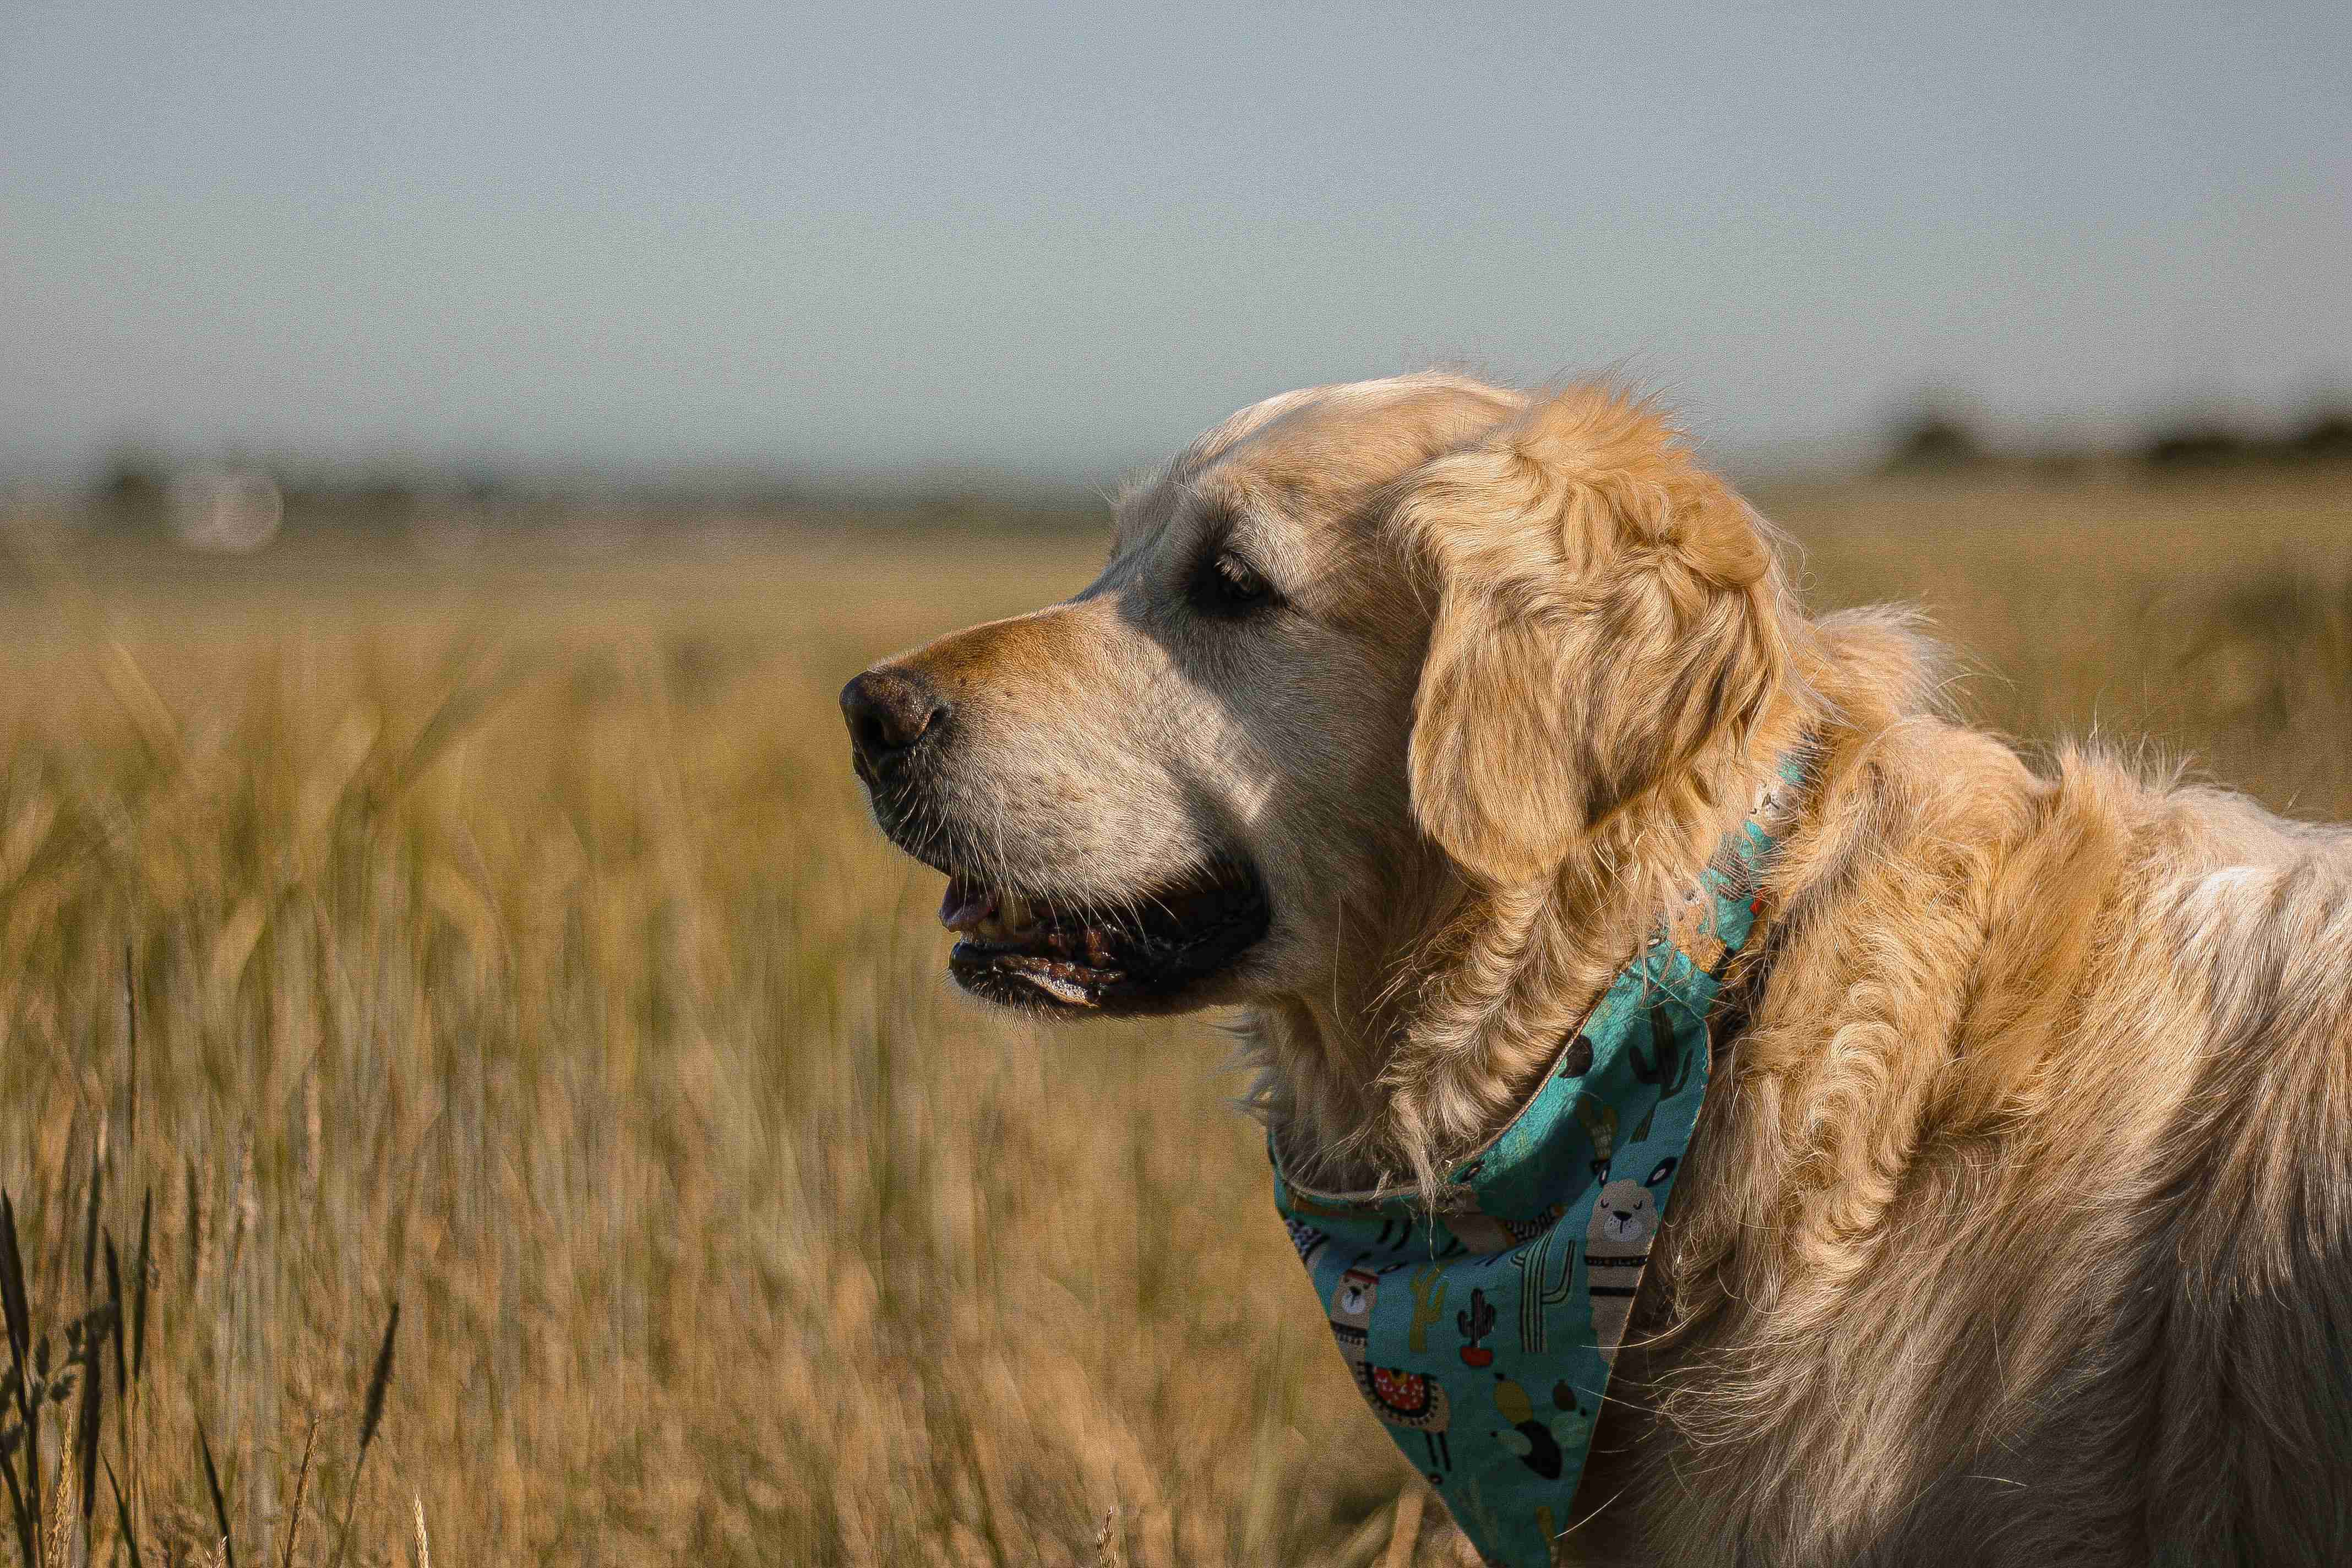 Can Golden Retrievers be trained to be therapy or assistance dogs?